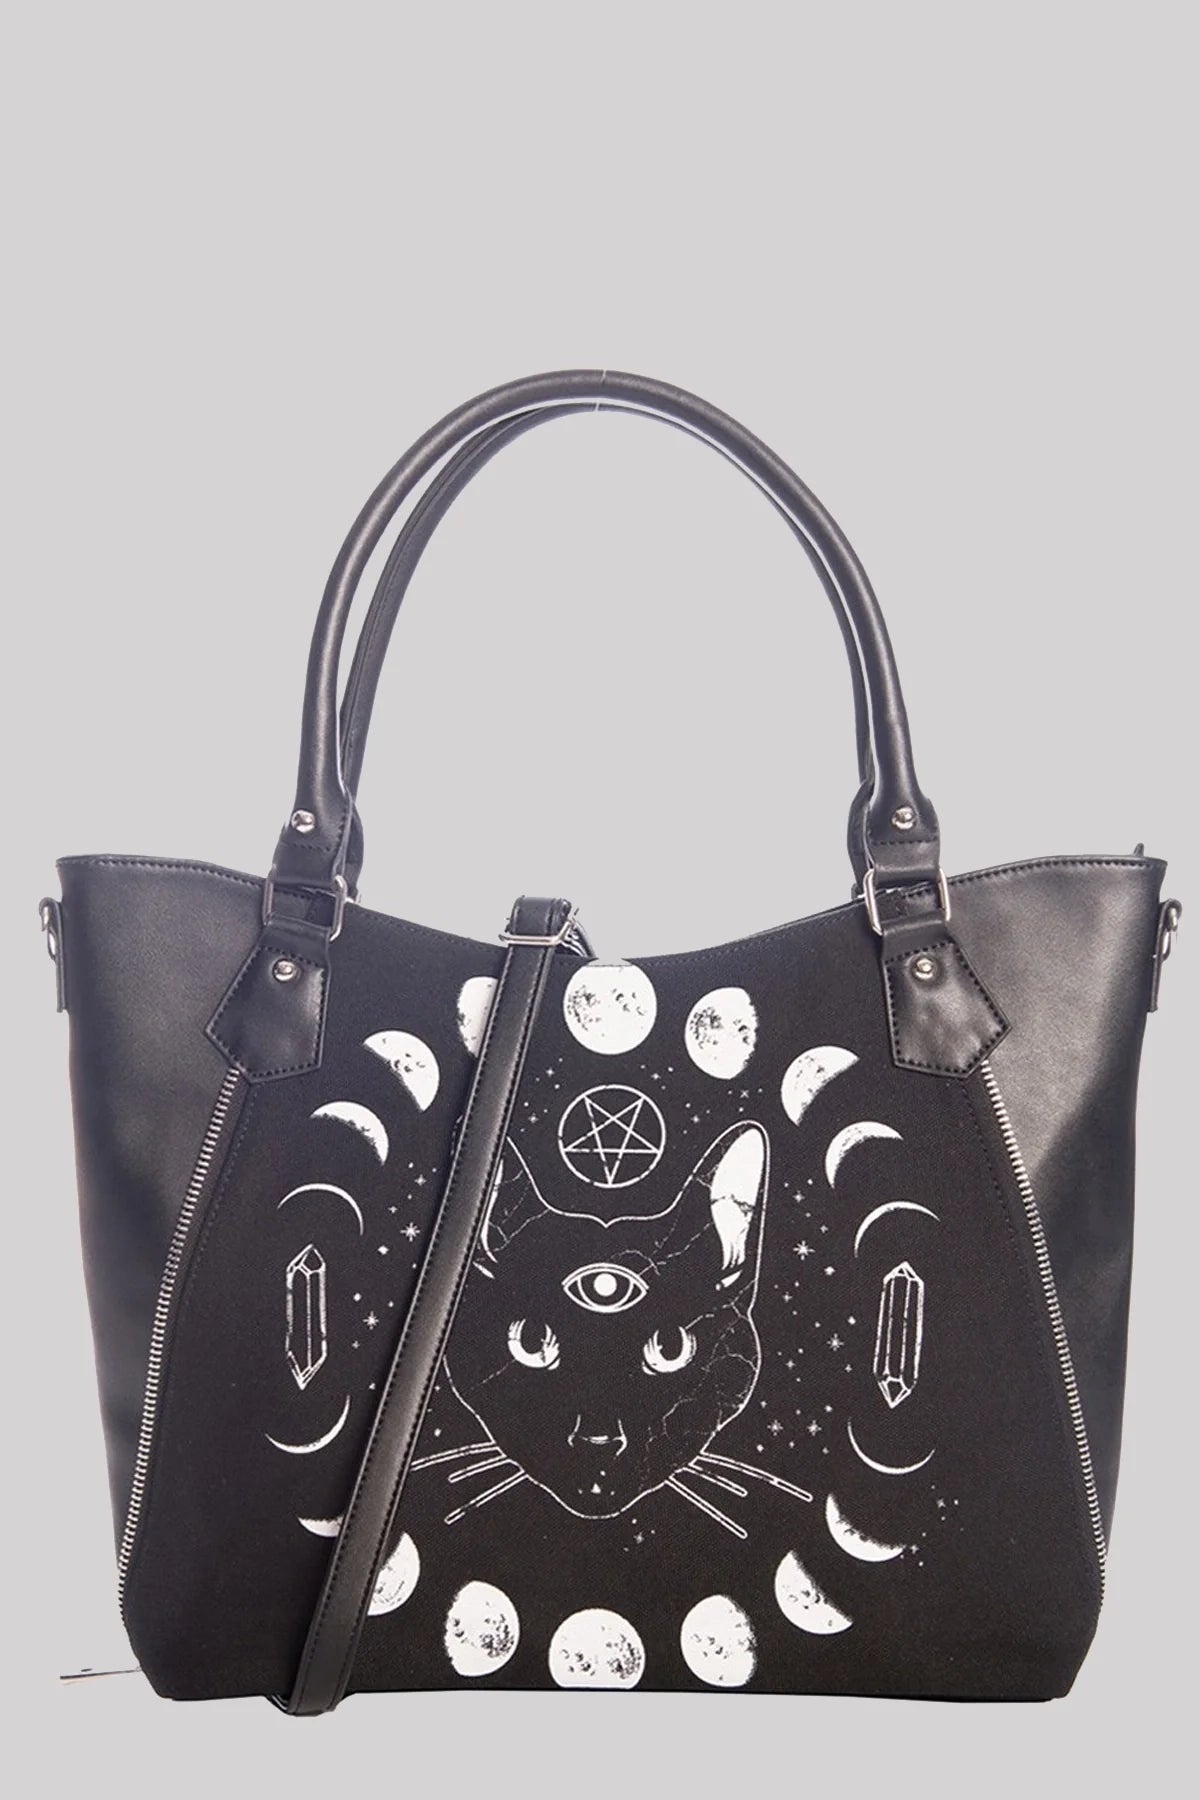 Banned Pentacle Coven Moon Phases Cat Bag